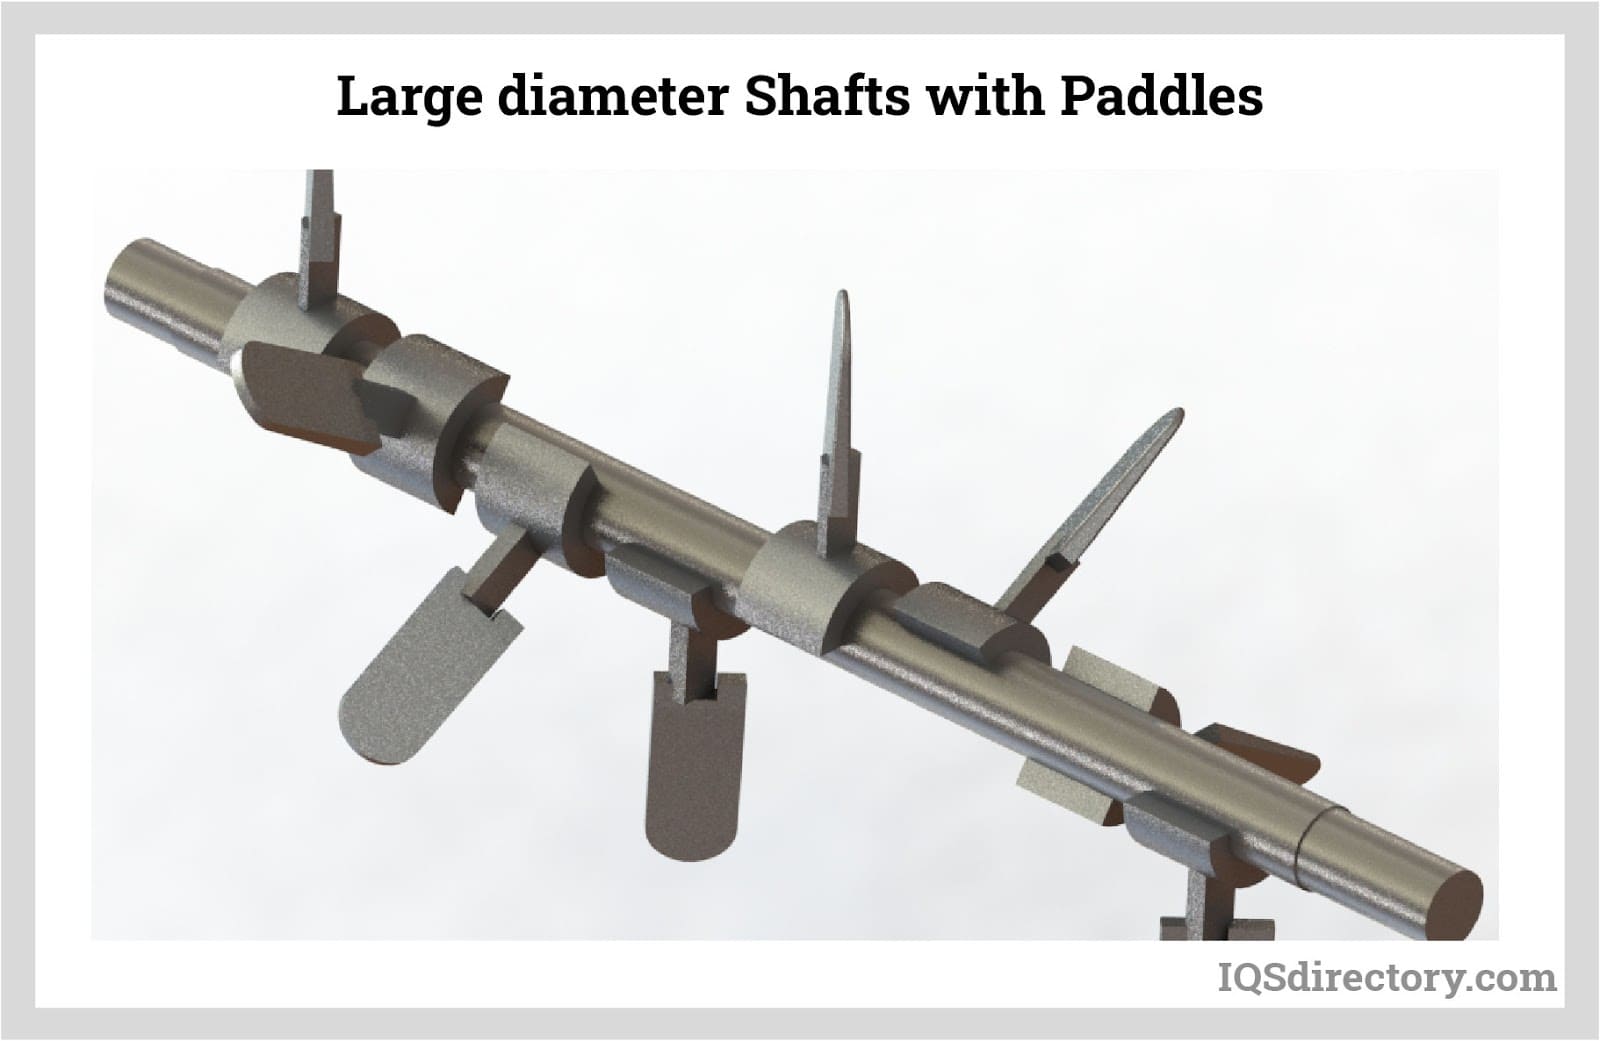 Large diameter Shafts with Paddles